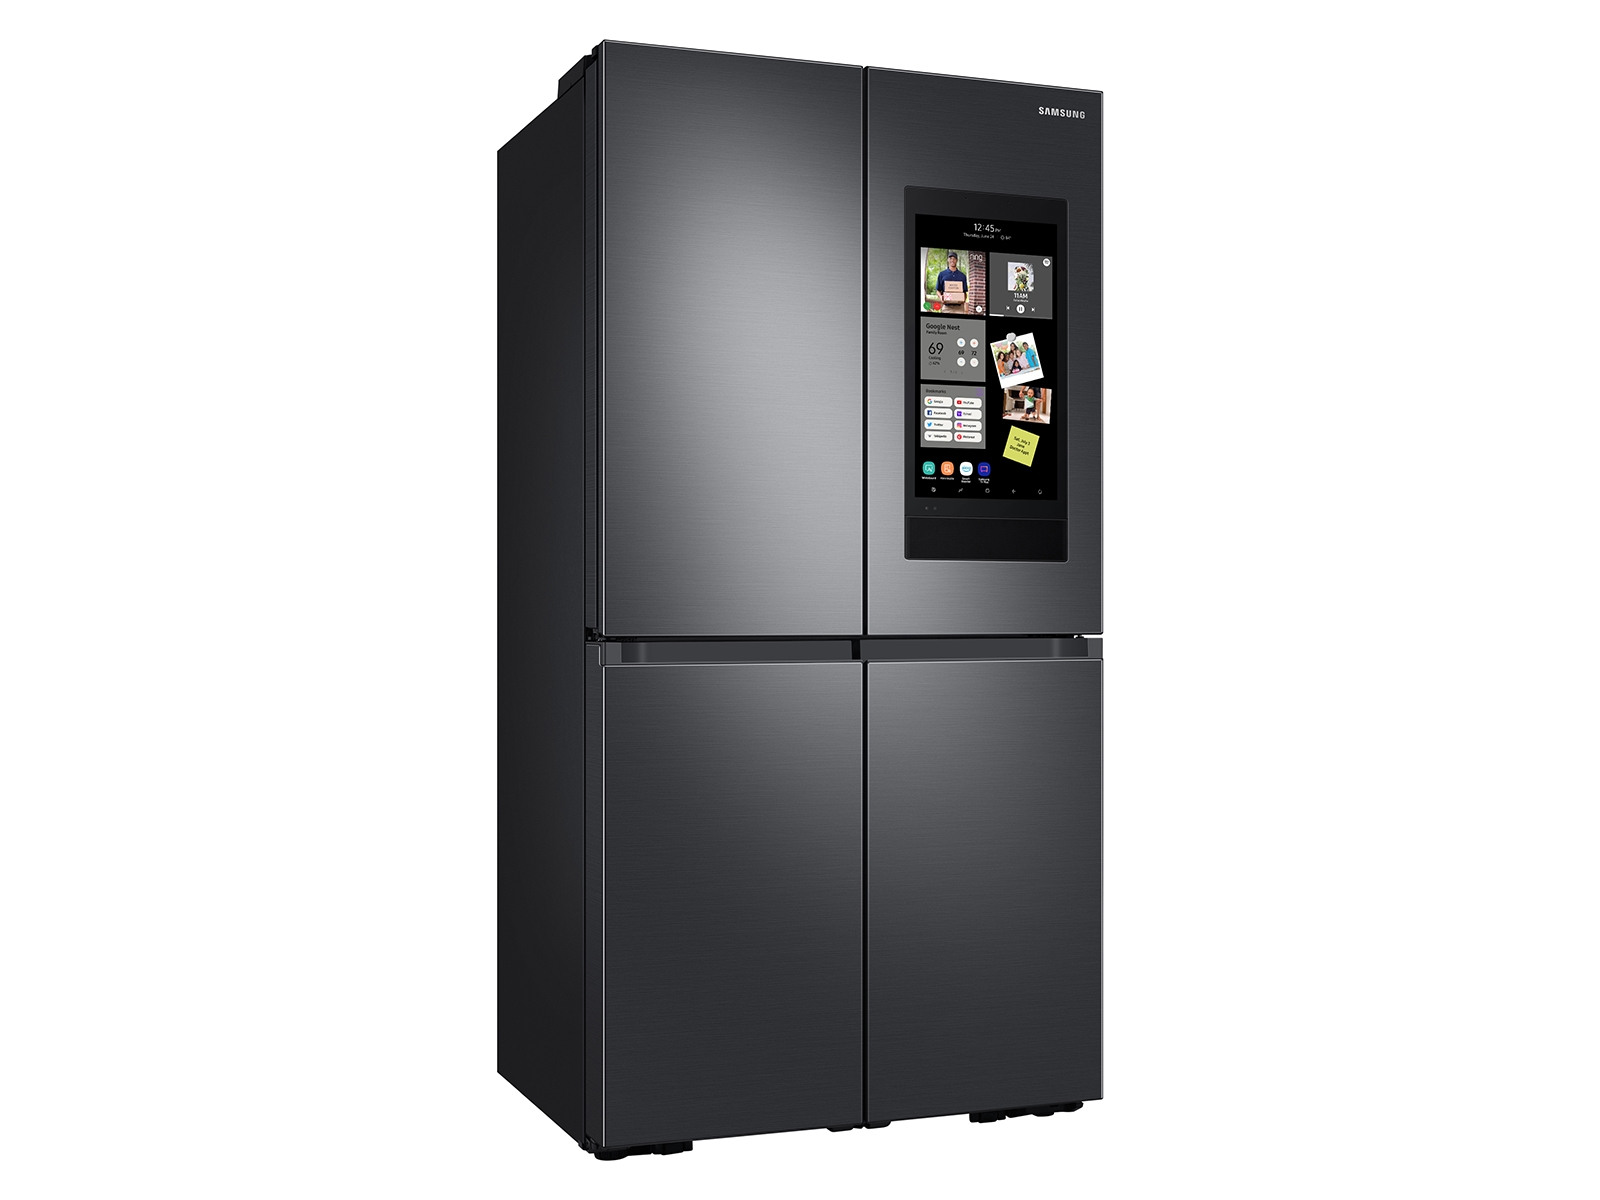 Outdoor Refrigerator Buying Guide - The Outdoor Appliance Store